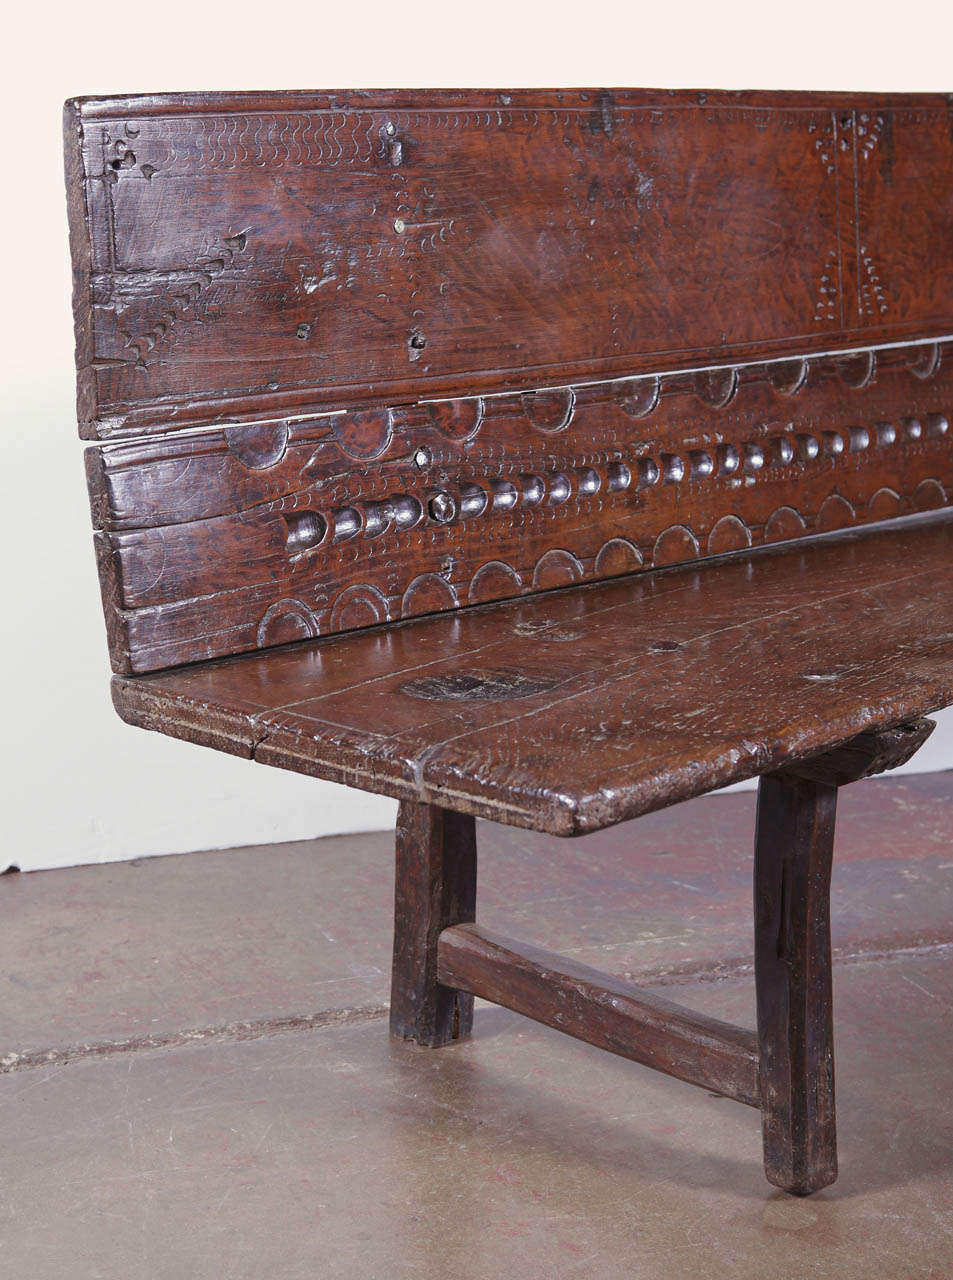 Patinated 18th Century Spanish Country Carved Chestnut Bench with Back